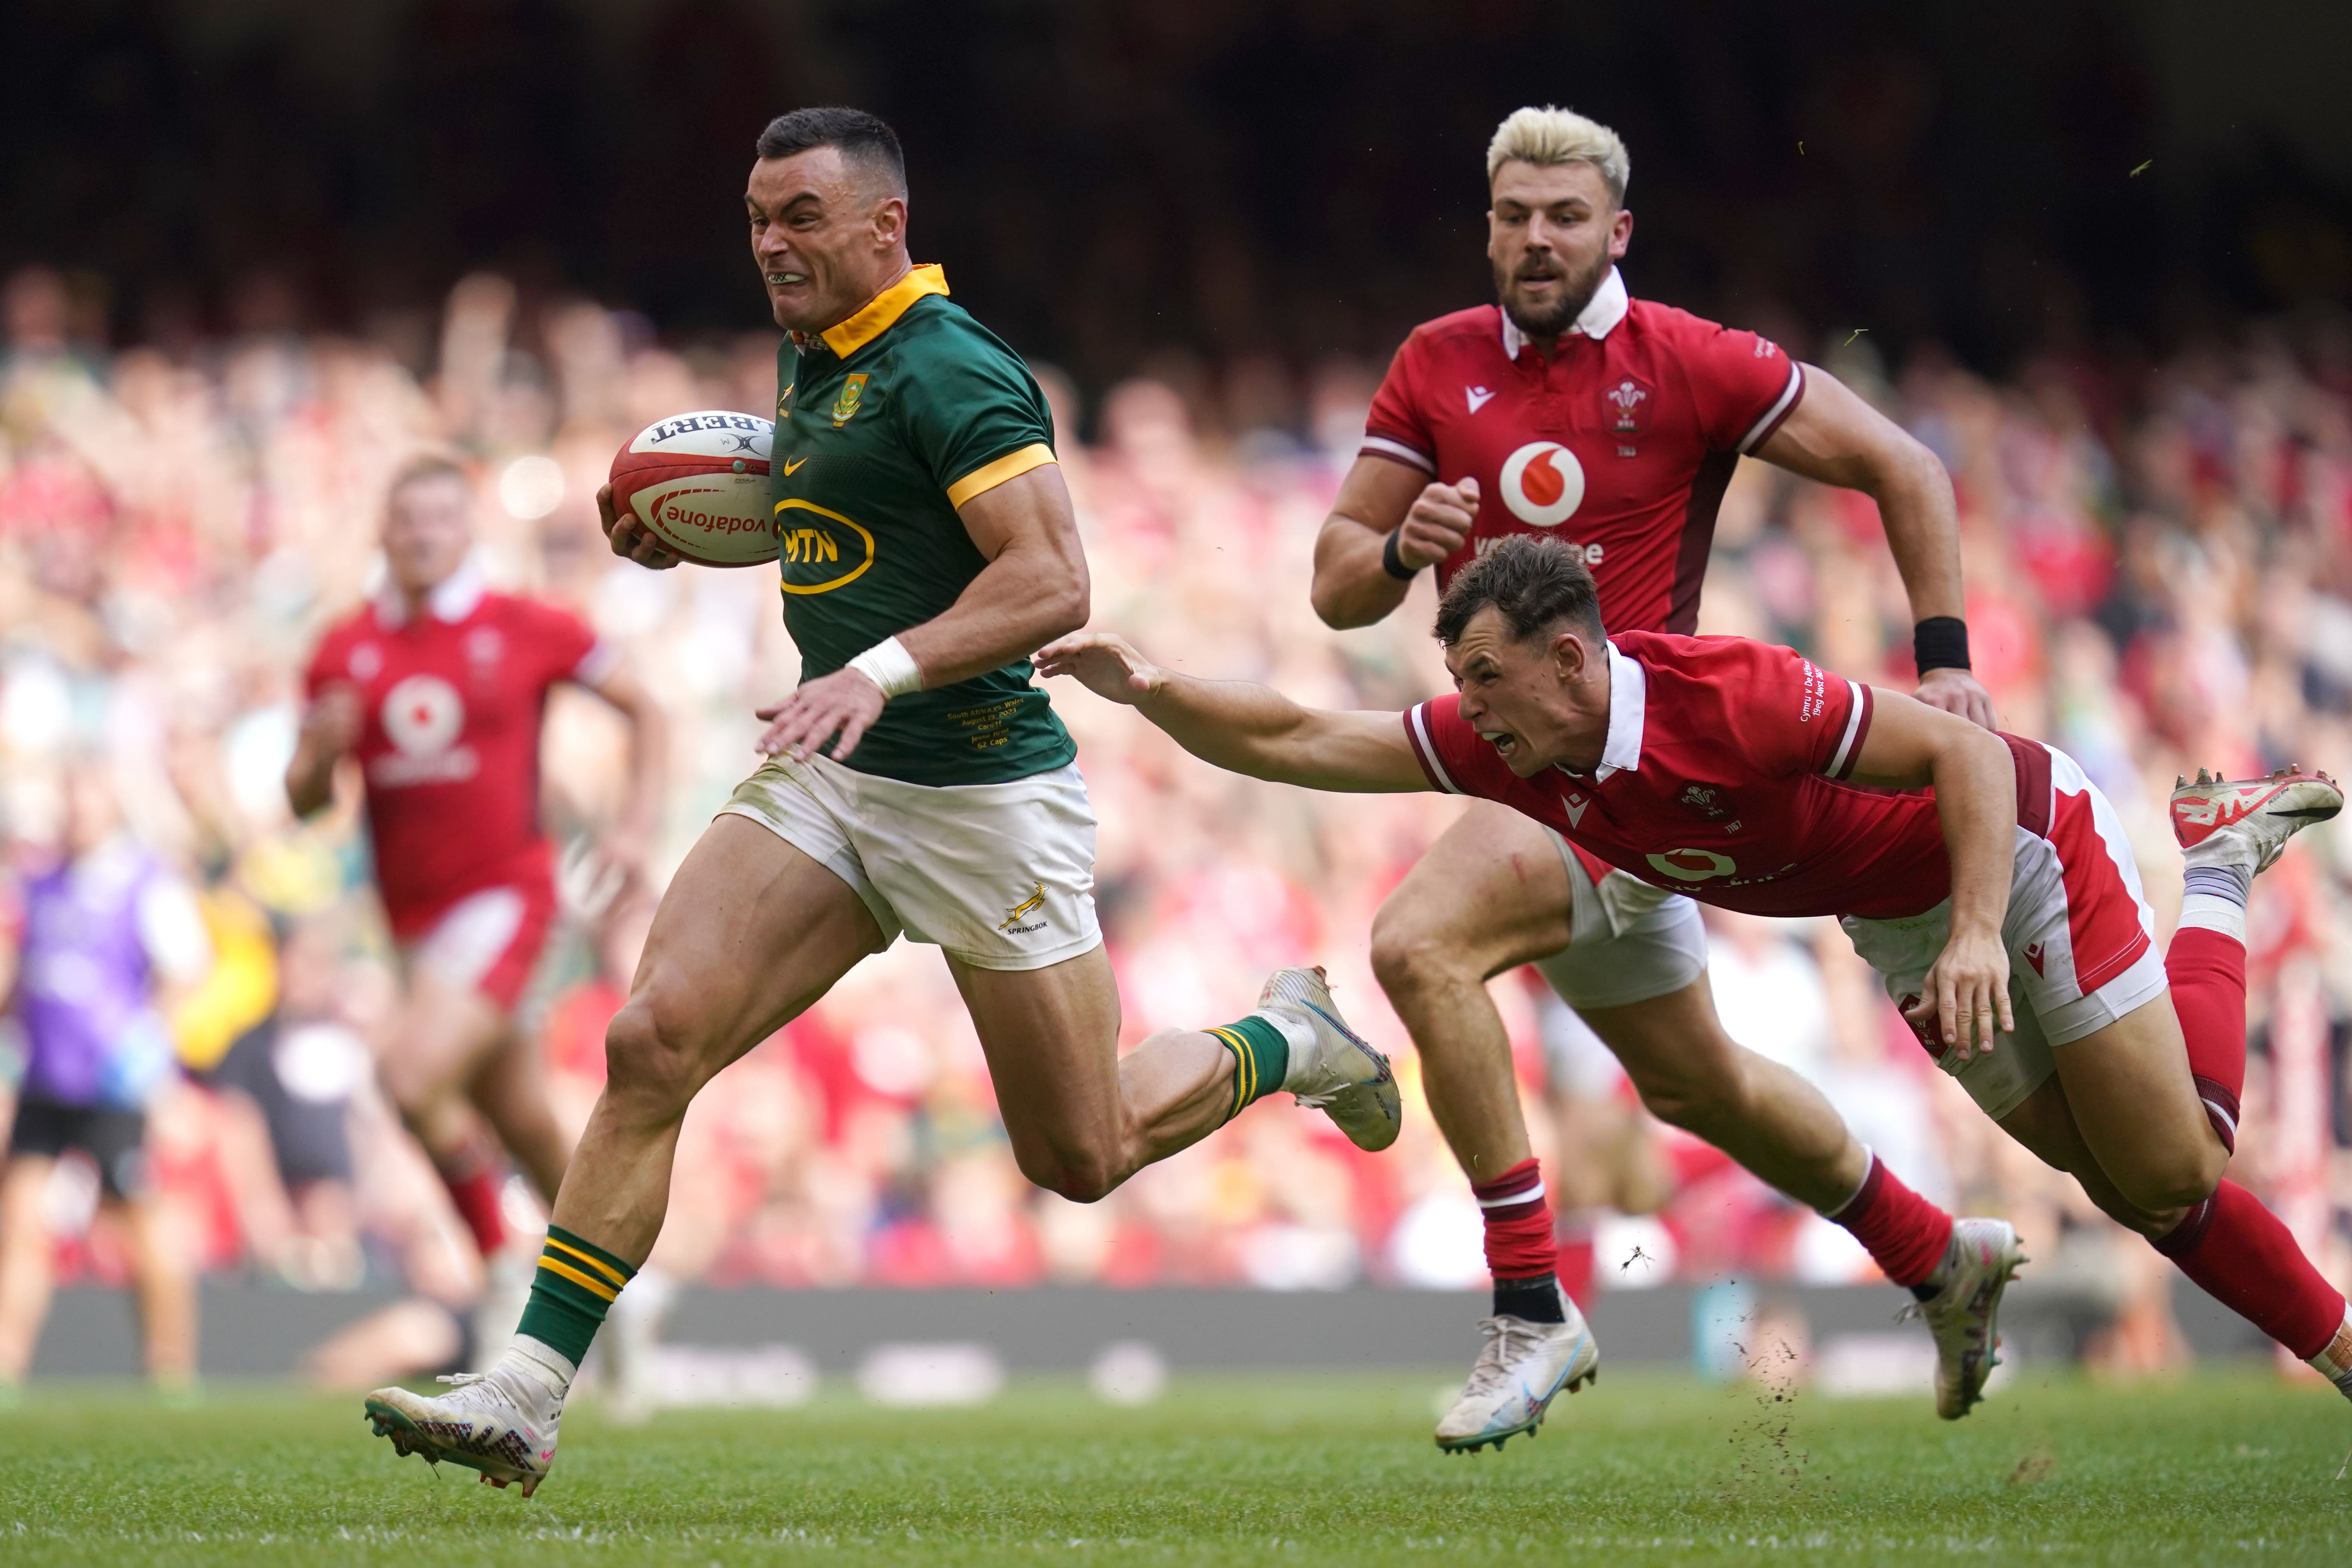 Wales face a testing encounter against South Africa at Twickenham (David Davies/PA)